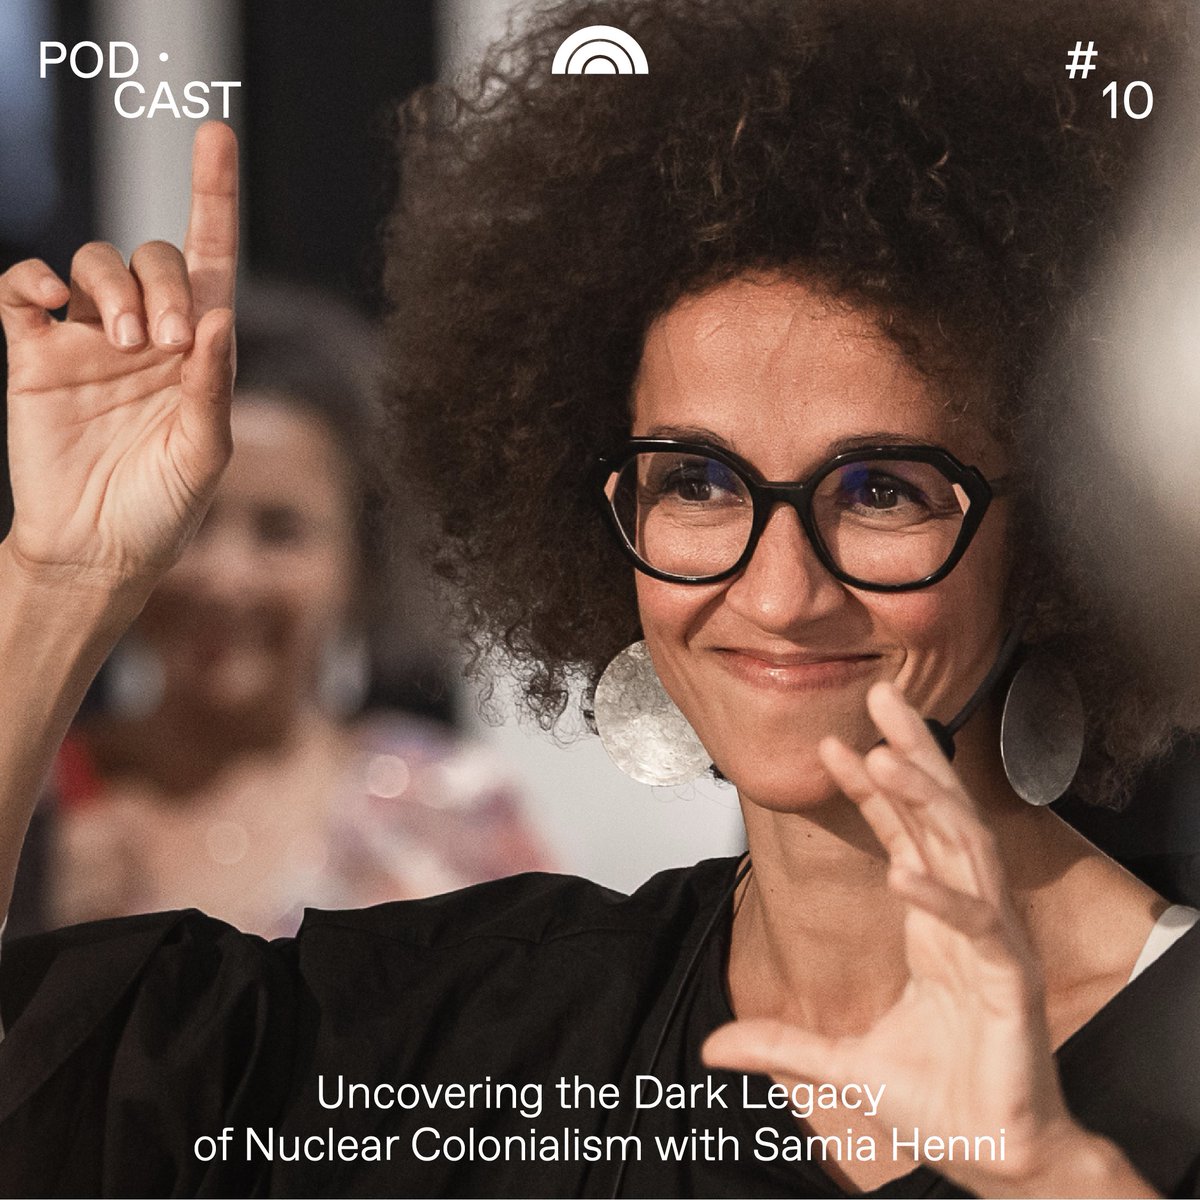 🎙️ Out now! 𝗣𝗼𝗱𝗰𝗮𝘀𝘁 𝗲𝗽𝗶𝘀𝗼𝗱𝗲 #𝟭𝟬 'Uncovering the Dark Legacy of Nuclear Colonialism'. A conversation with researcher and architectural historian ⁠Samia Henni as she discusses her current exhibition at @FramerFramed. → Listen here: bit.ly/3QdgST6